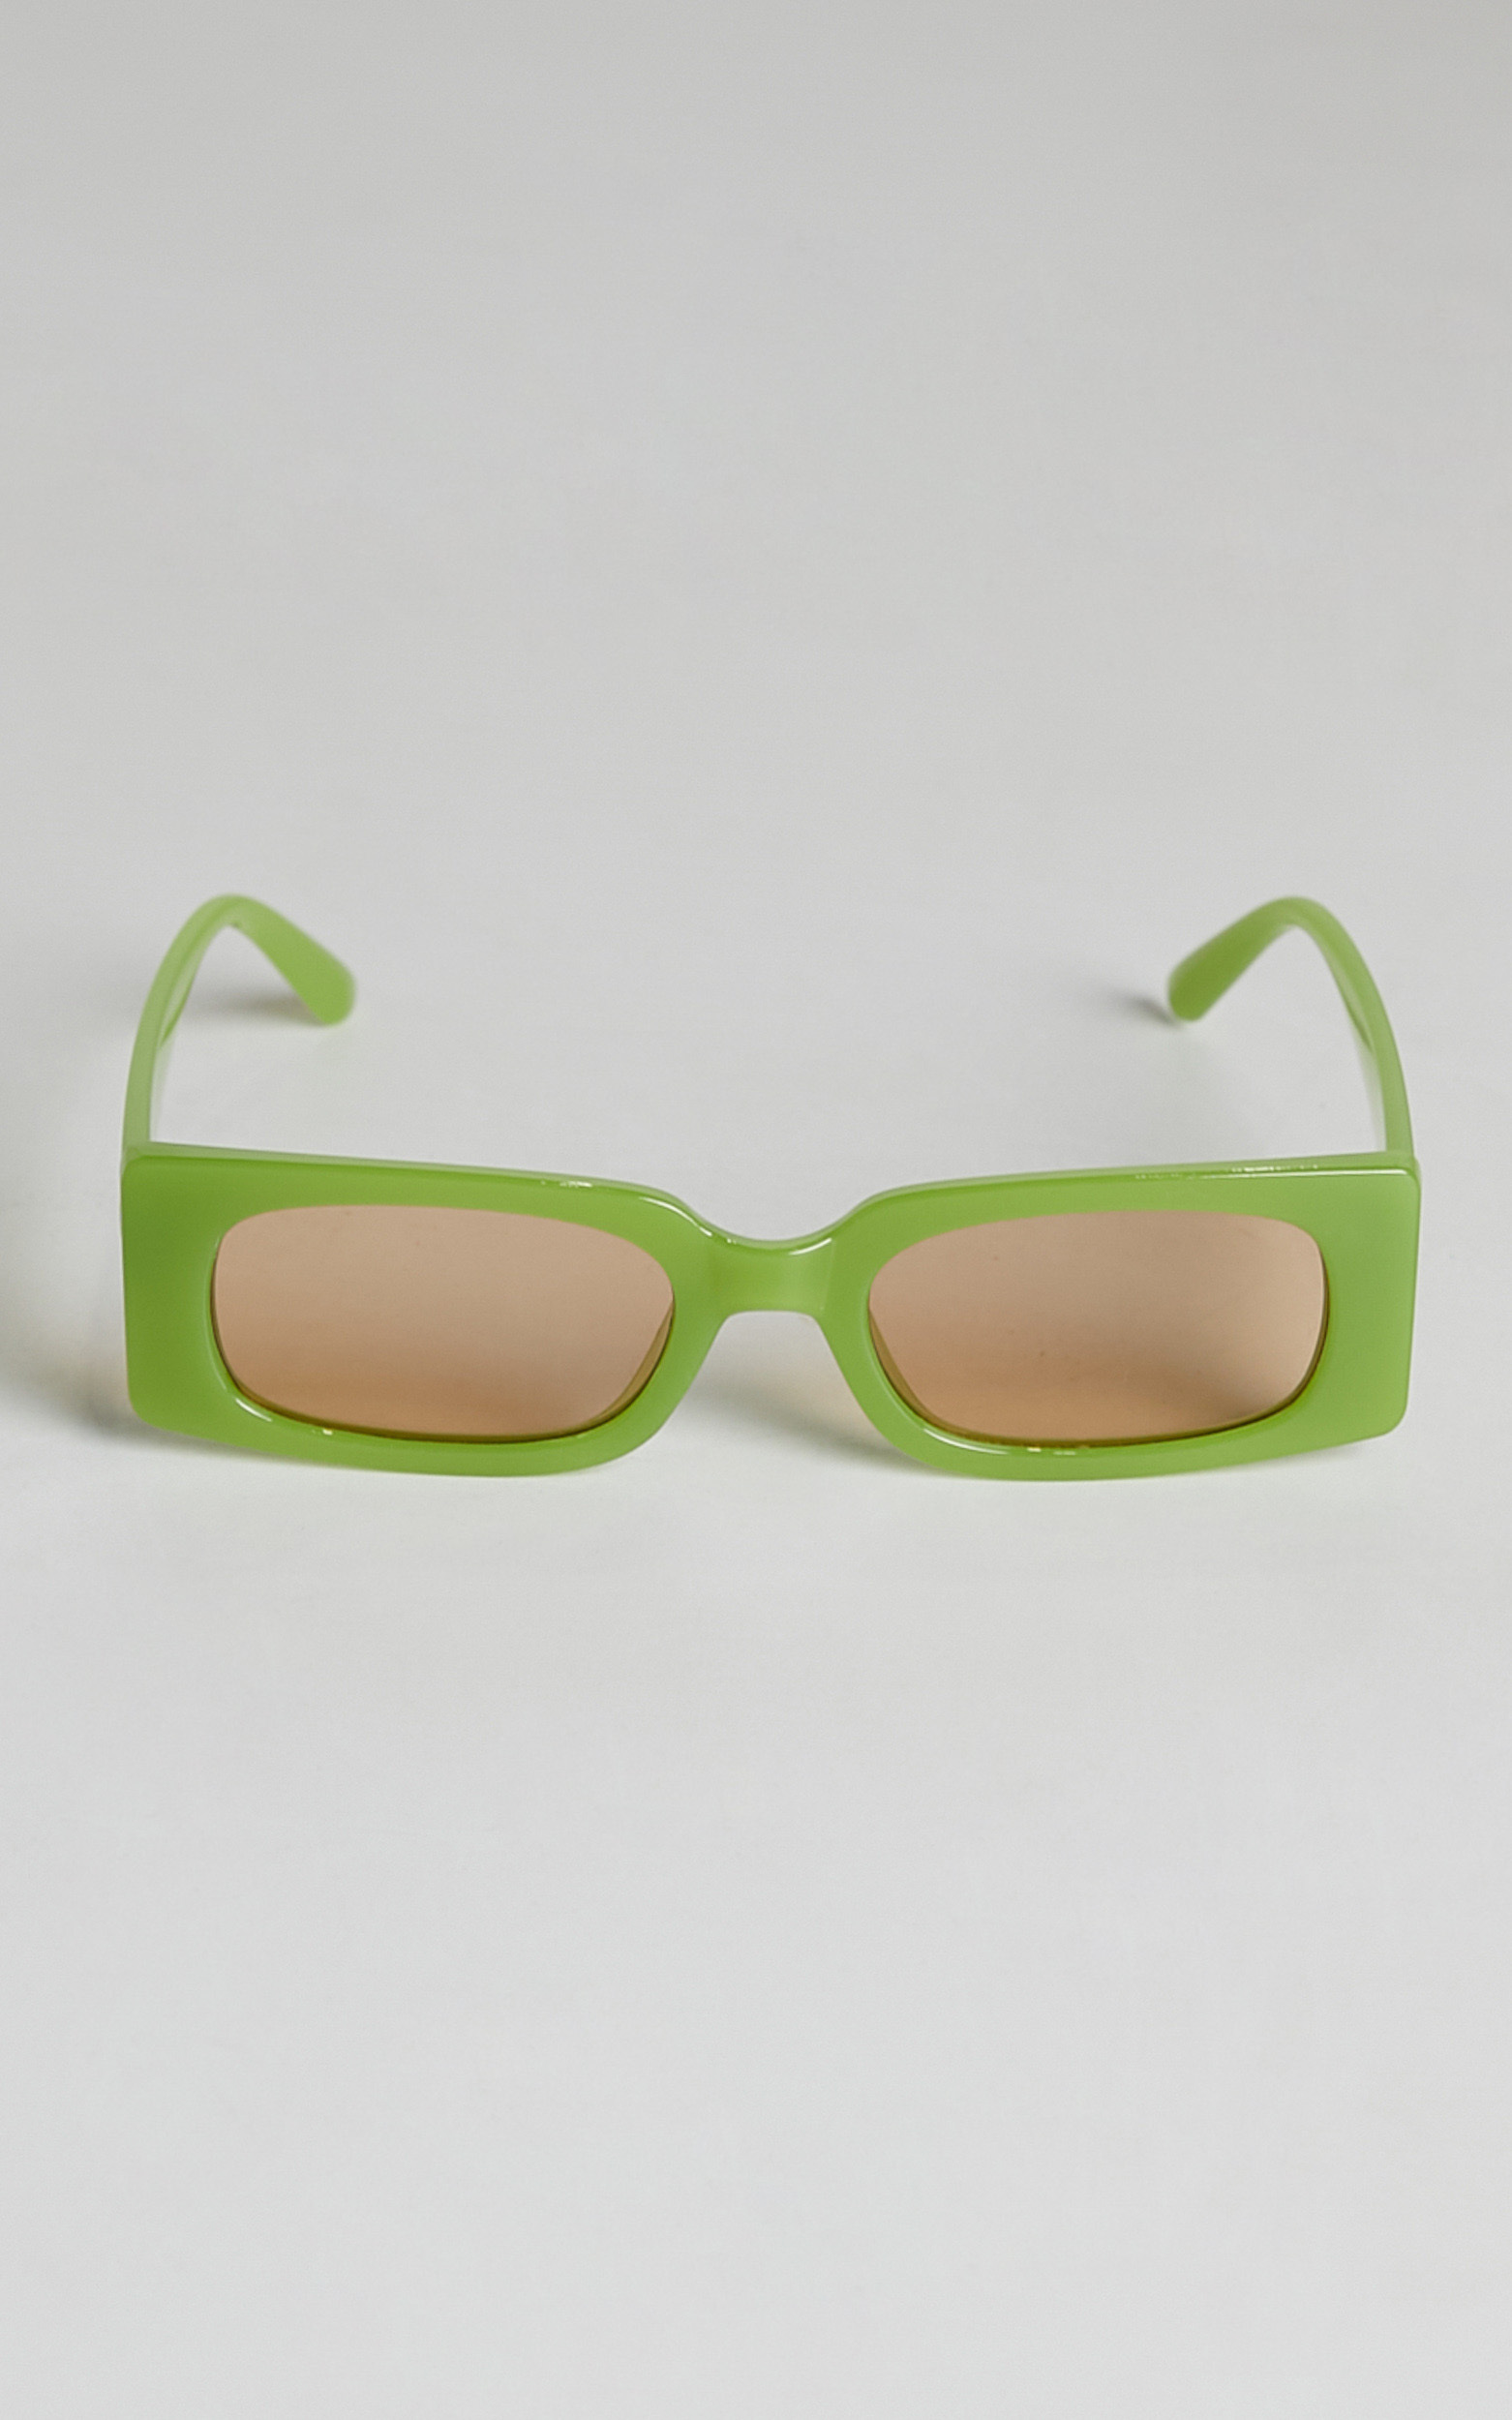 Eliana Sunglasses in Green - NoSize, GRN1, hi-res image number null